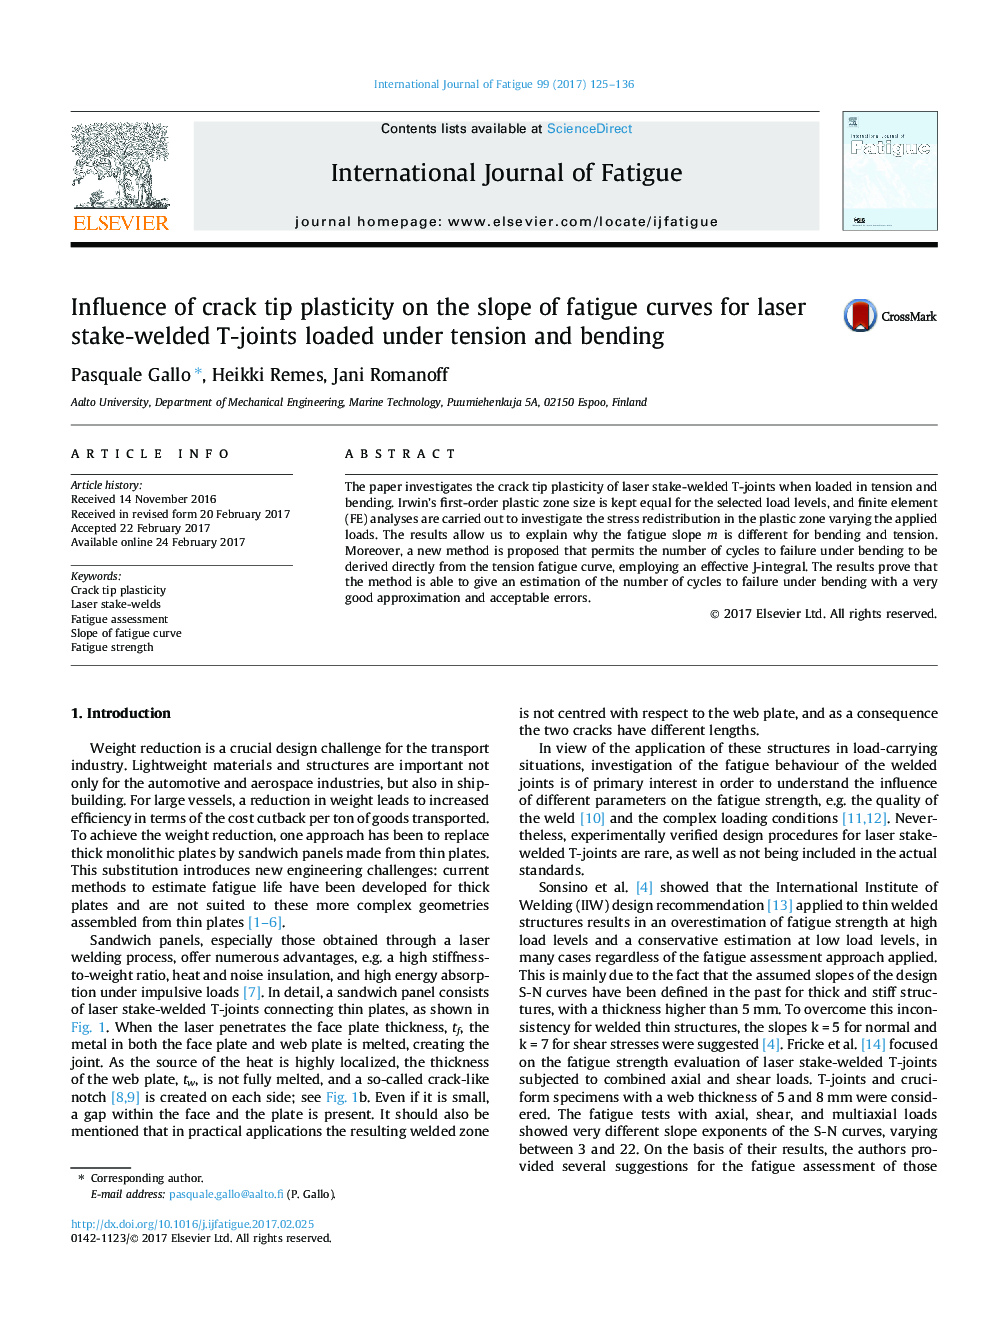 Influence of crack tip plasticity on the slope of fatigue curves for laser stake-welded T-joints loaded under tension and bending